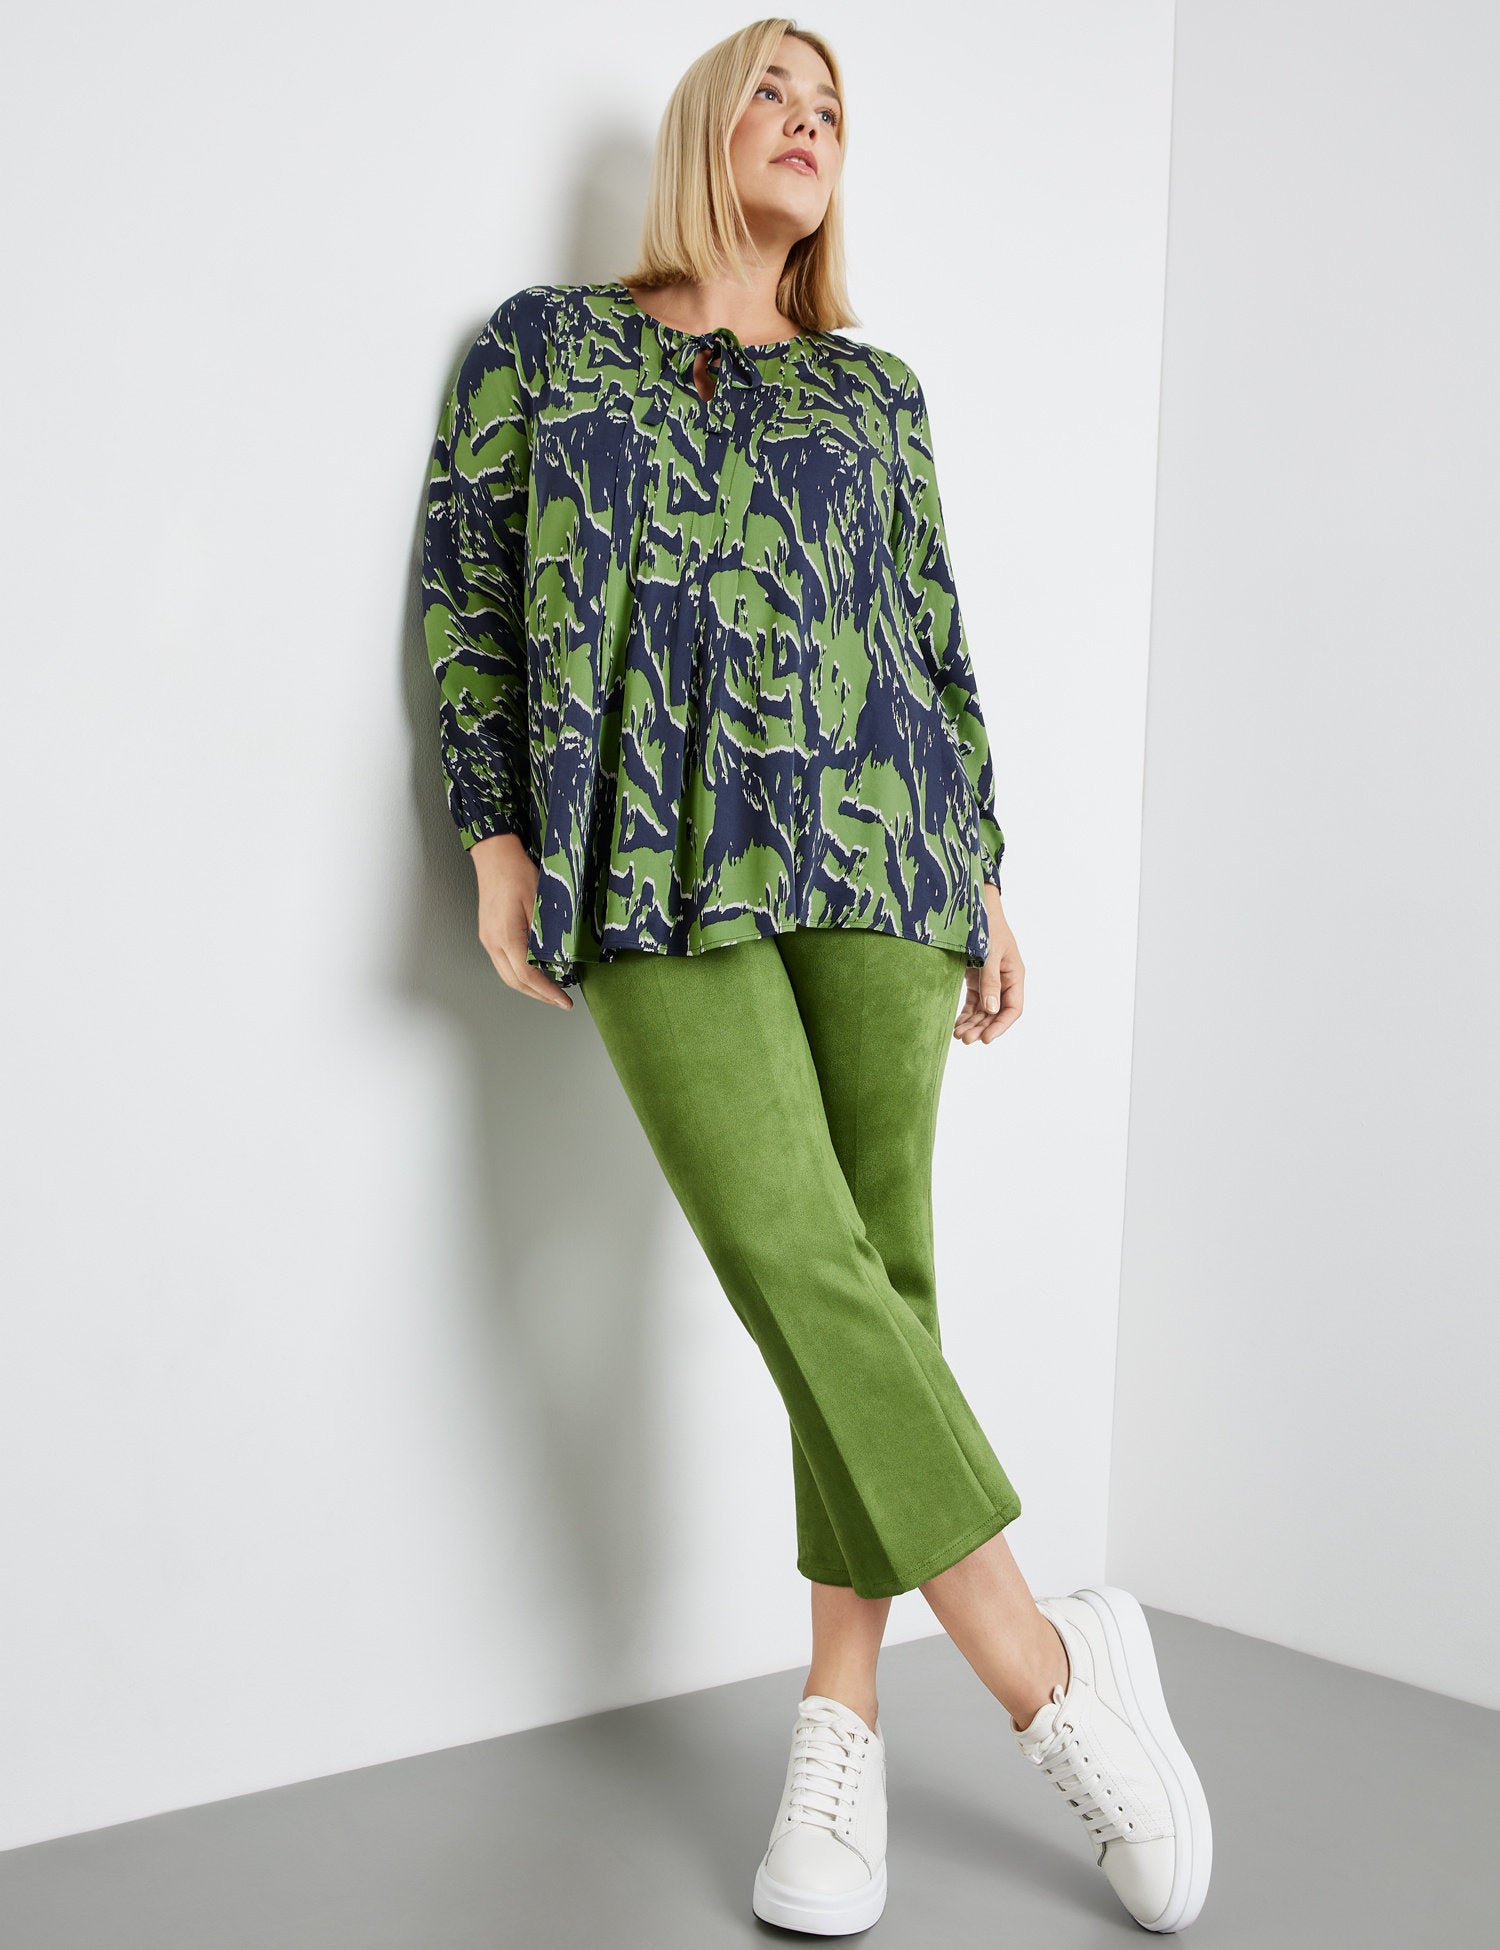 Casual Blouse With A Pintuck Inset Panel_360222-21234_8452_05